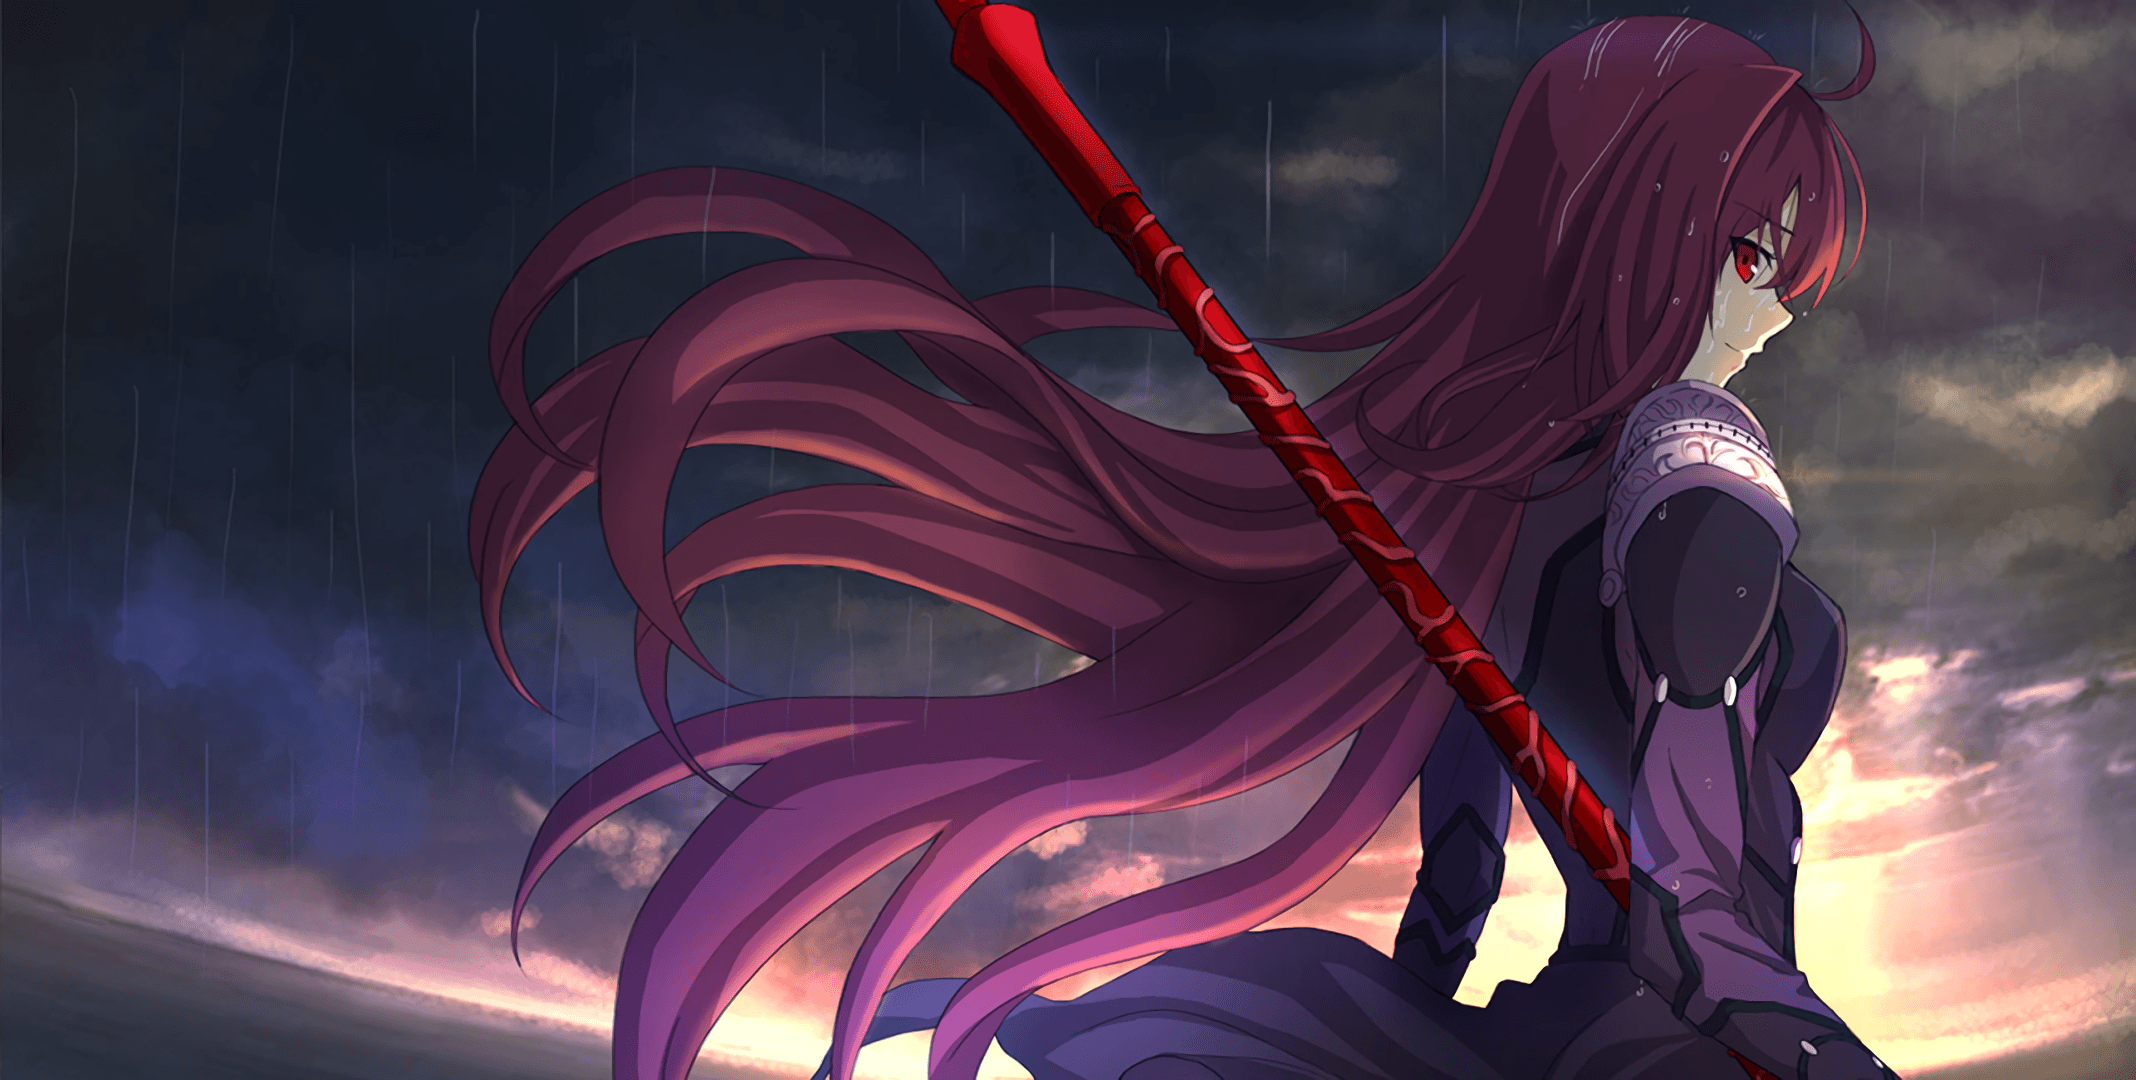 Scathach (Fate Grand Order) HD Wallpaper